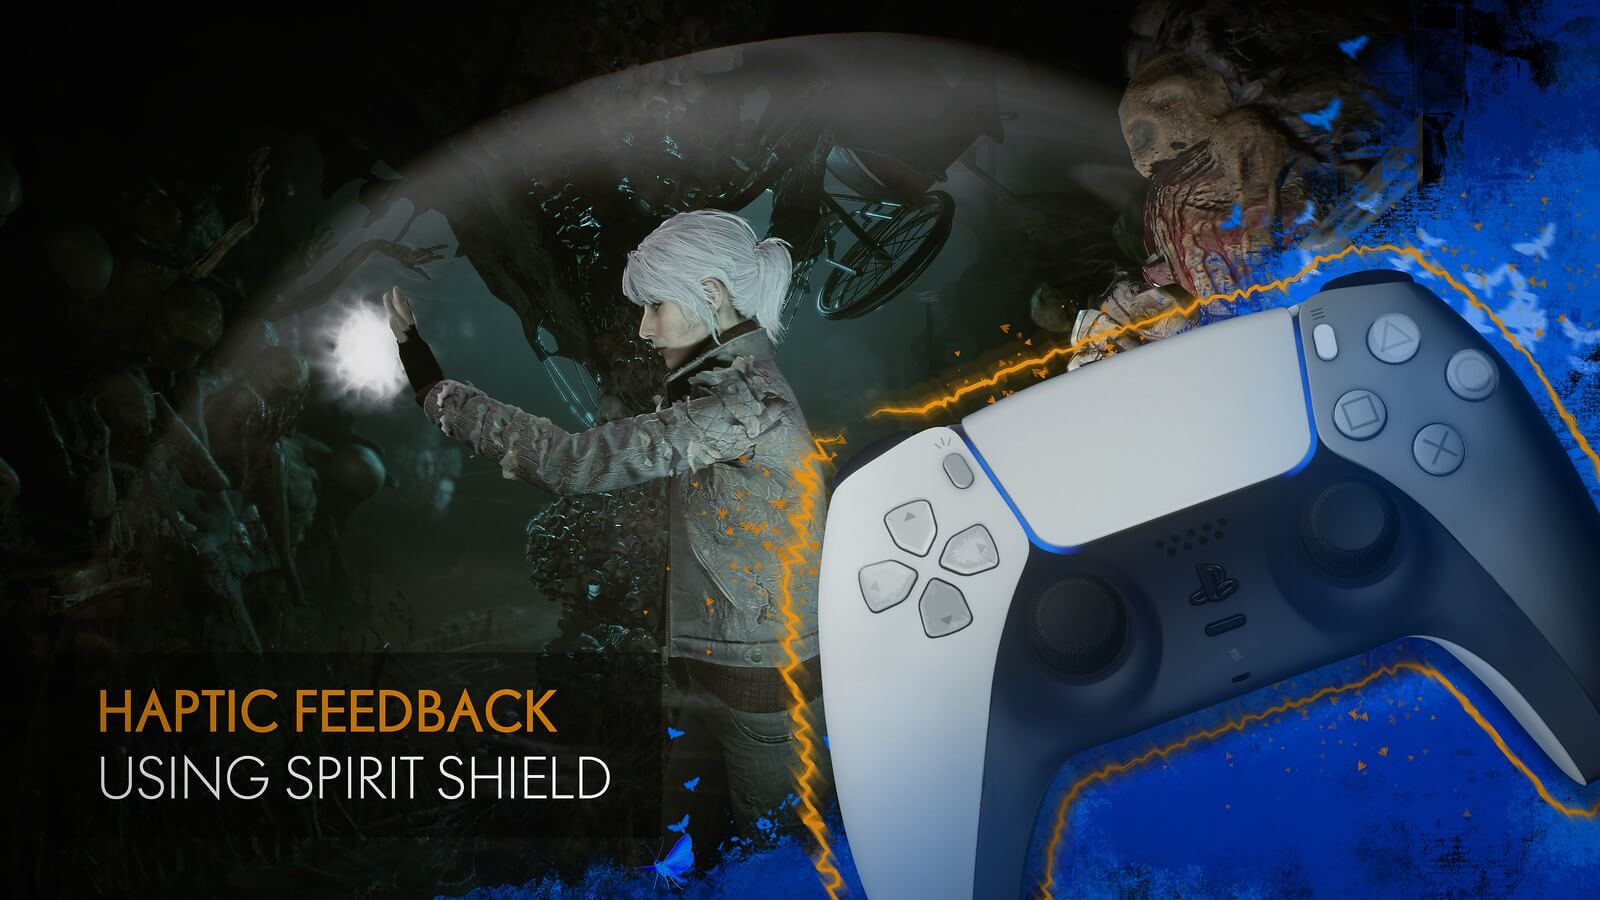 A PlayStation banner image showing the haptic feedback feature in The Medium